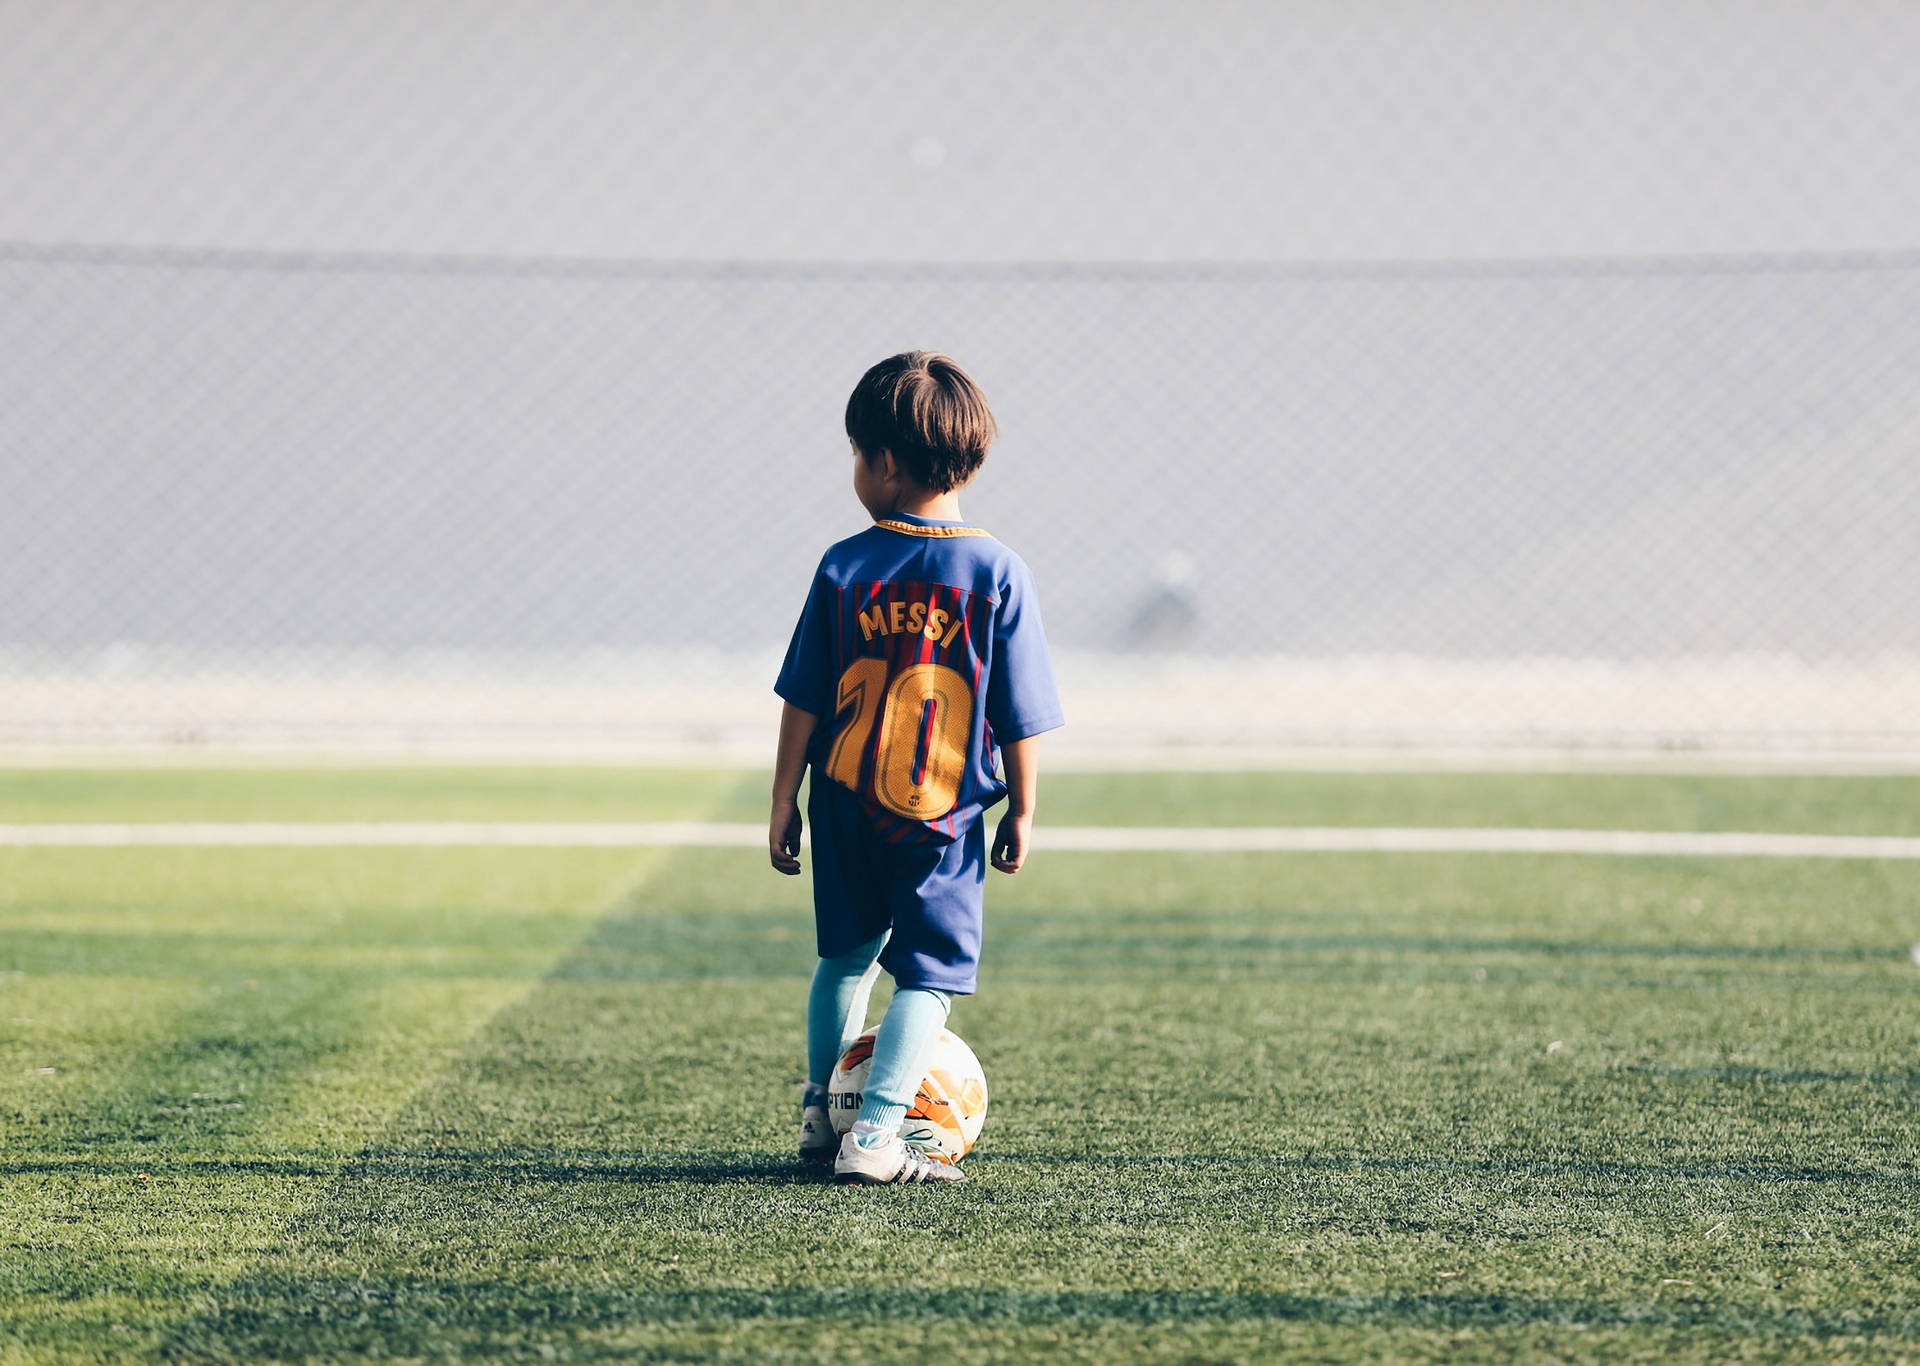 A young hopeful looks forward to one day wearing Lionel Messi's jersey. Wallpaper